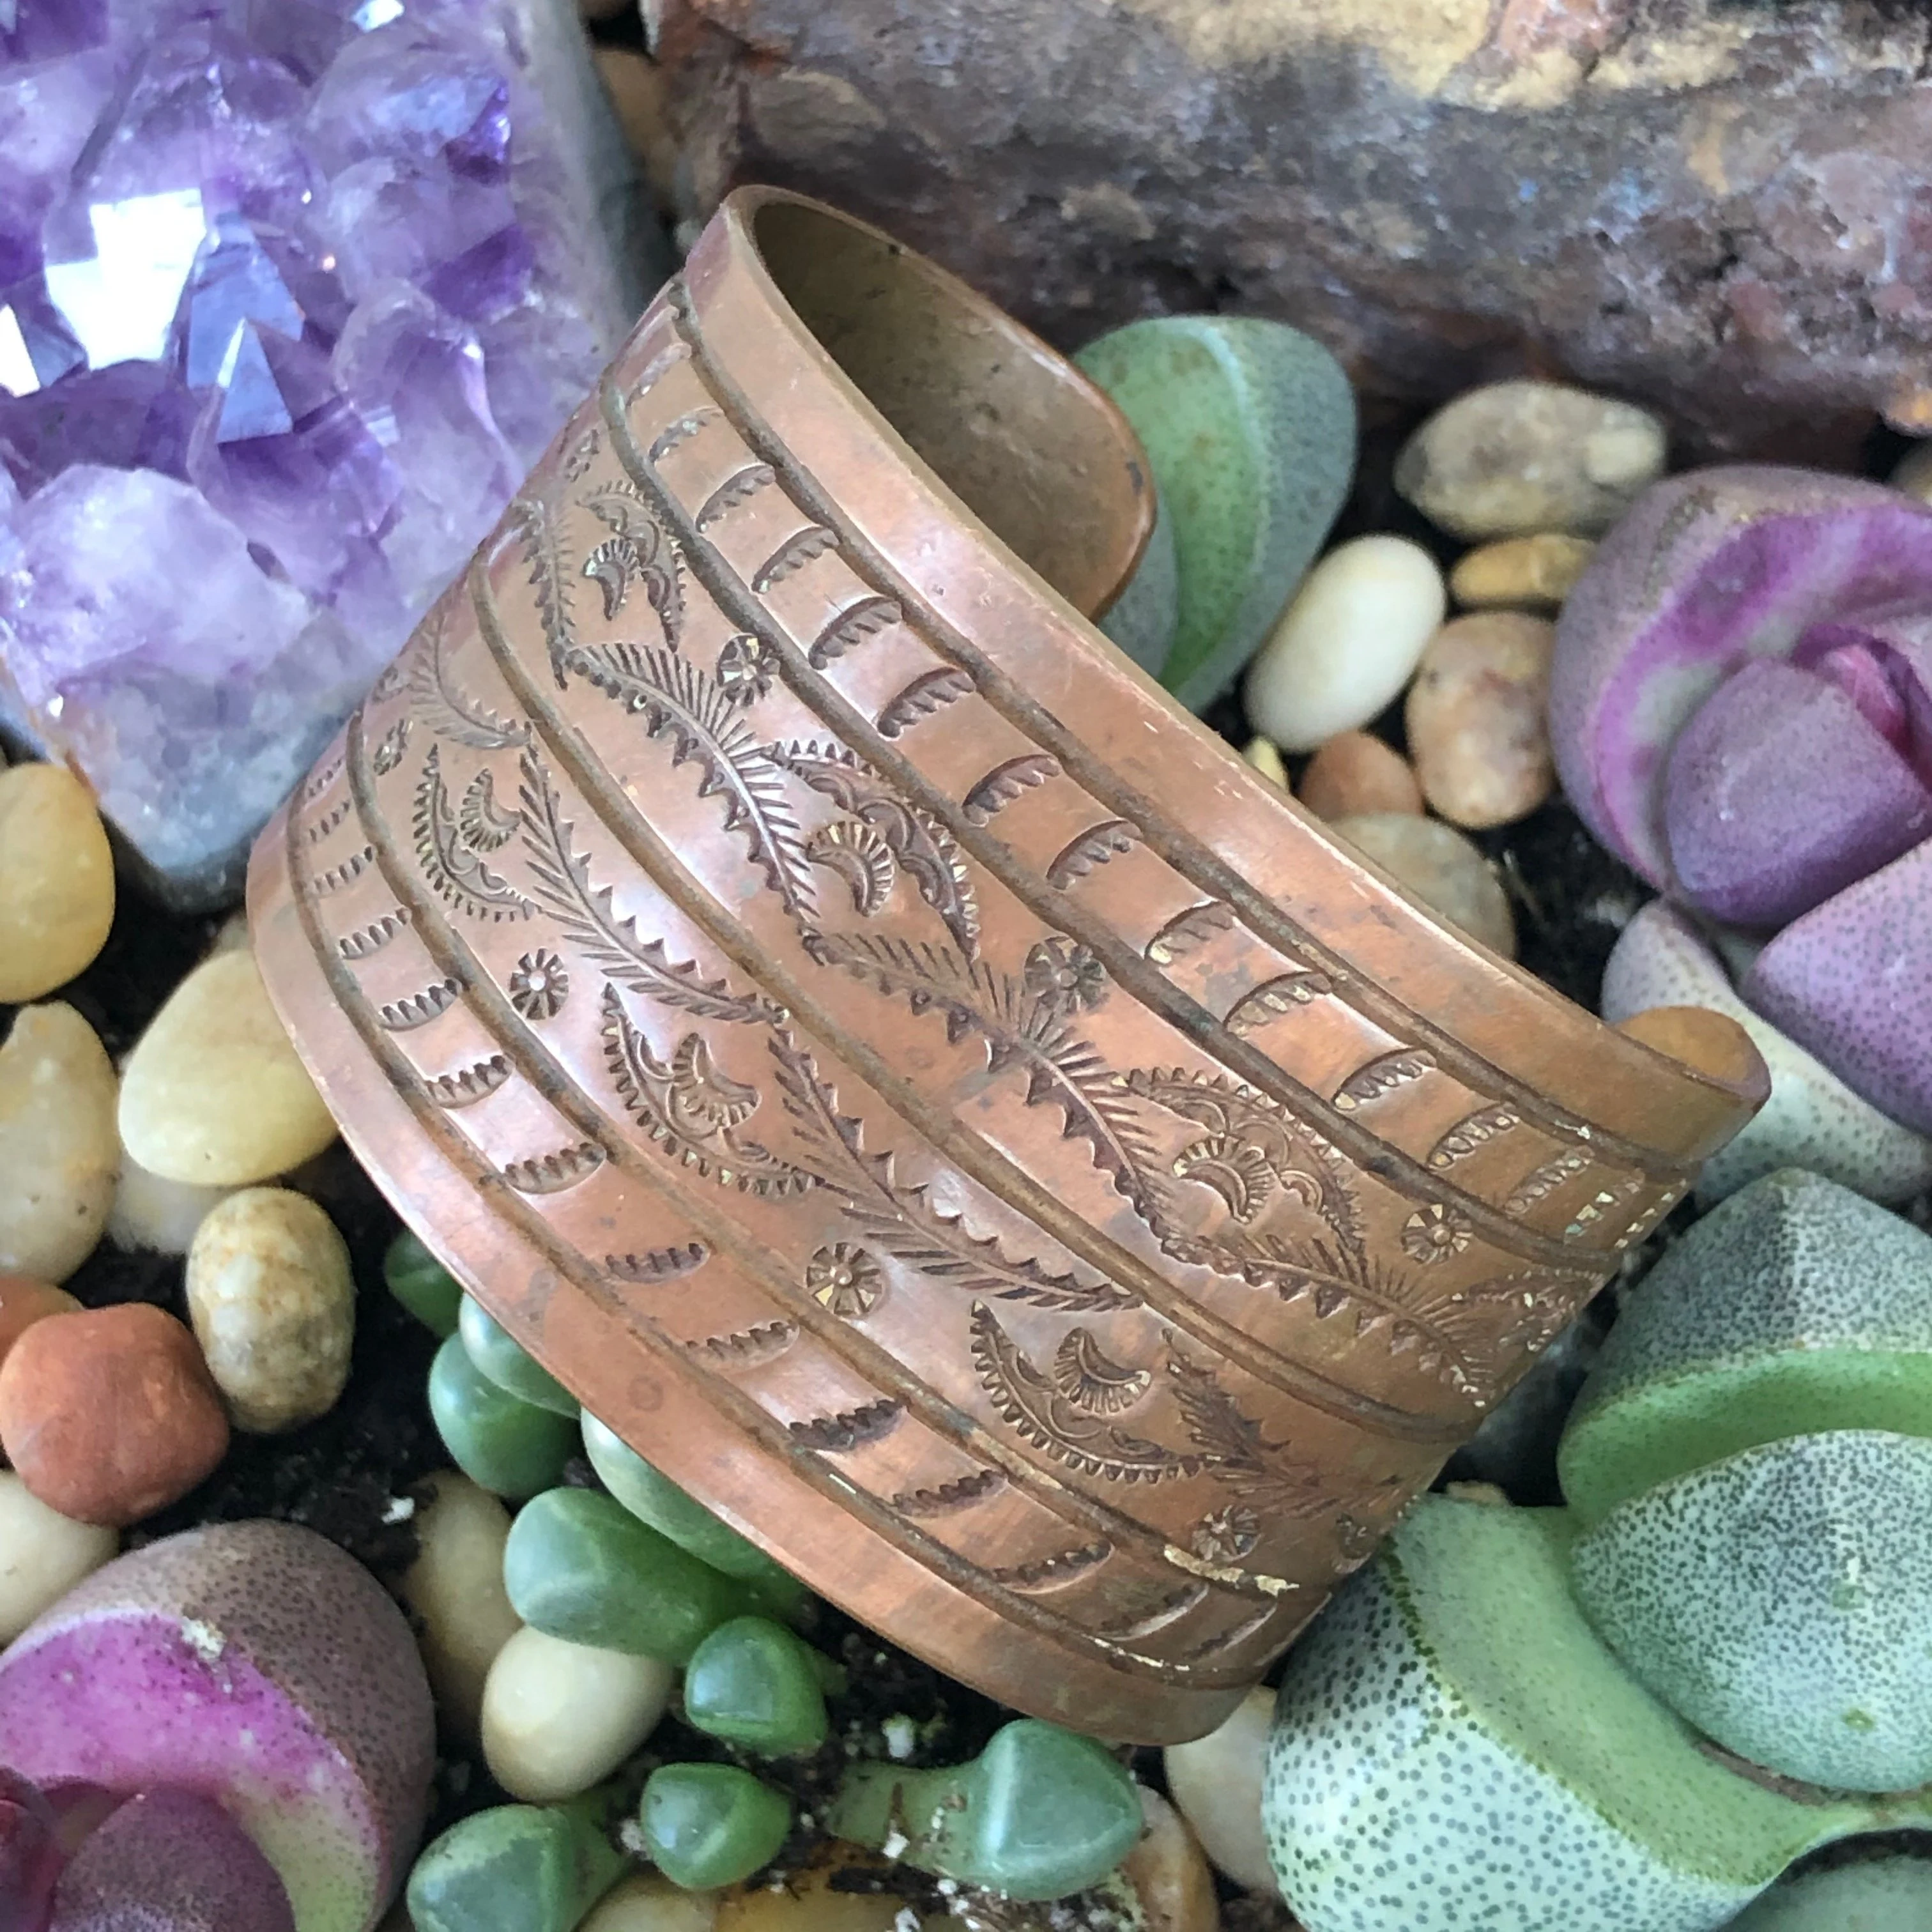 Early Navajo Wrought Copper Cuff Bracelet with Dye Stamp Decoration